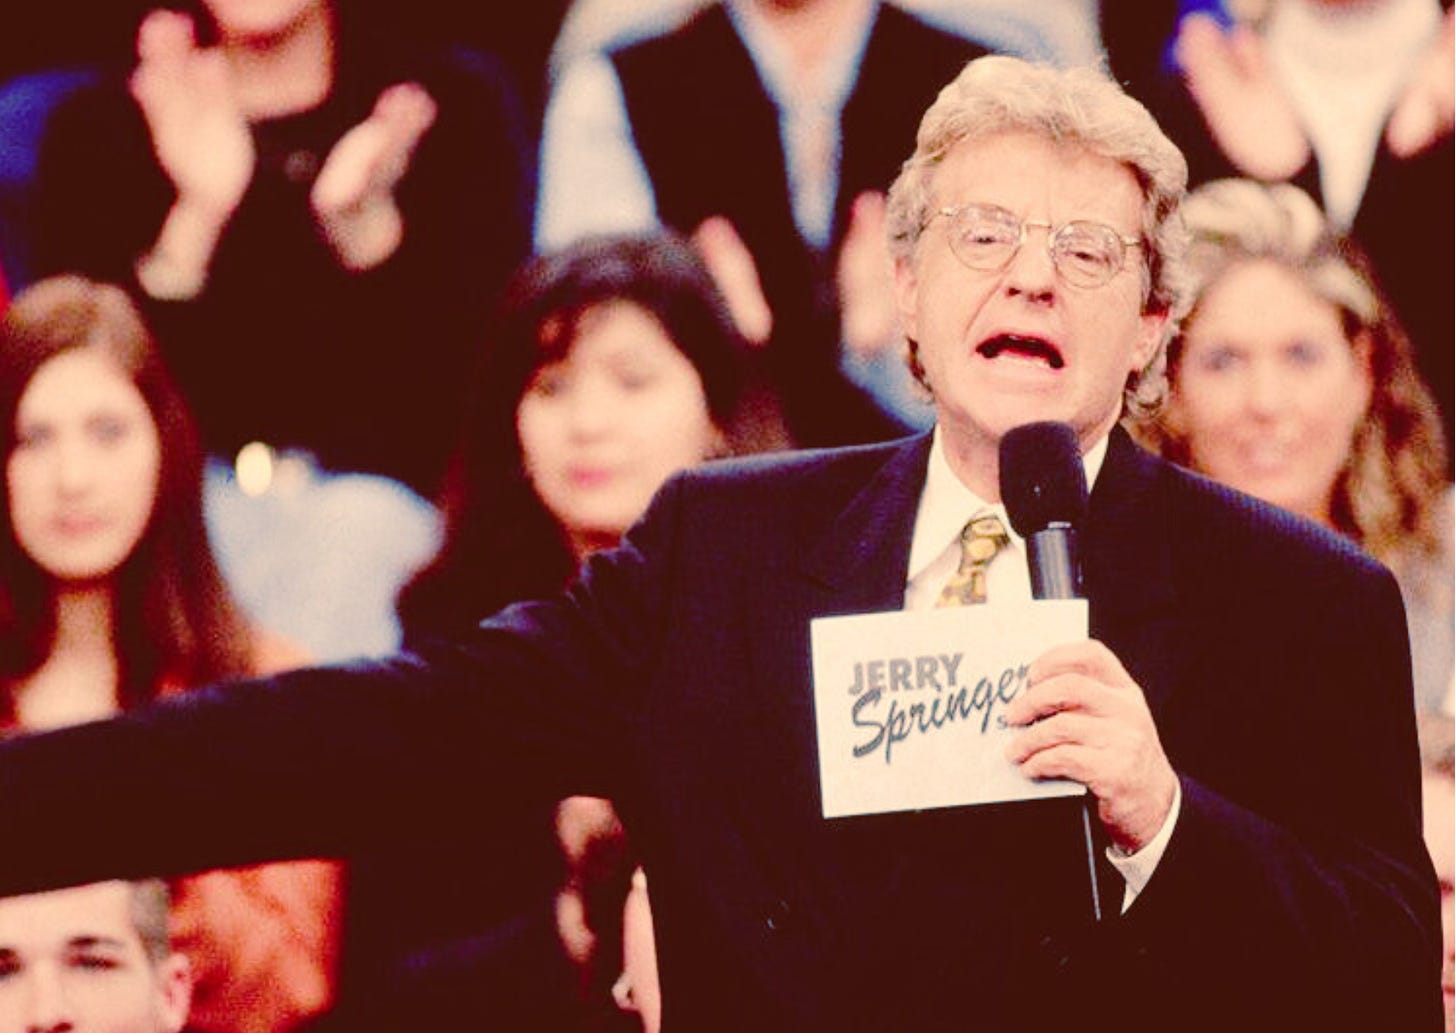 A picture from the Jerry Springer show; Springer in front of the audience, cards and microphone in hand, with a nostalgic filter applied.